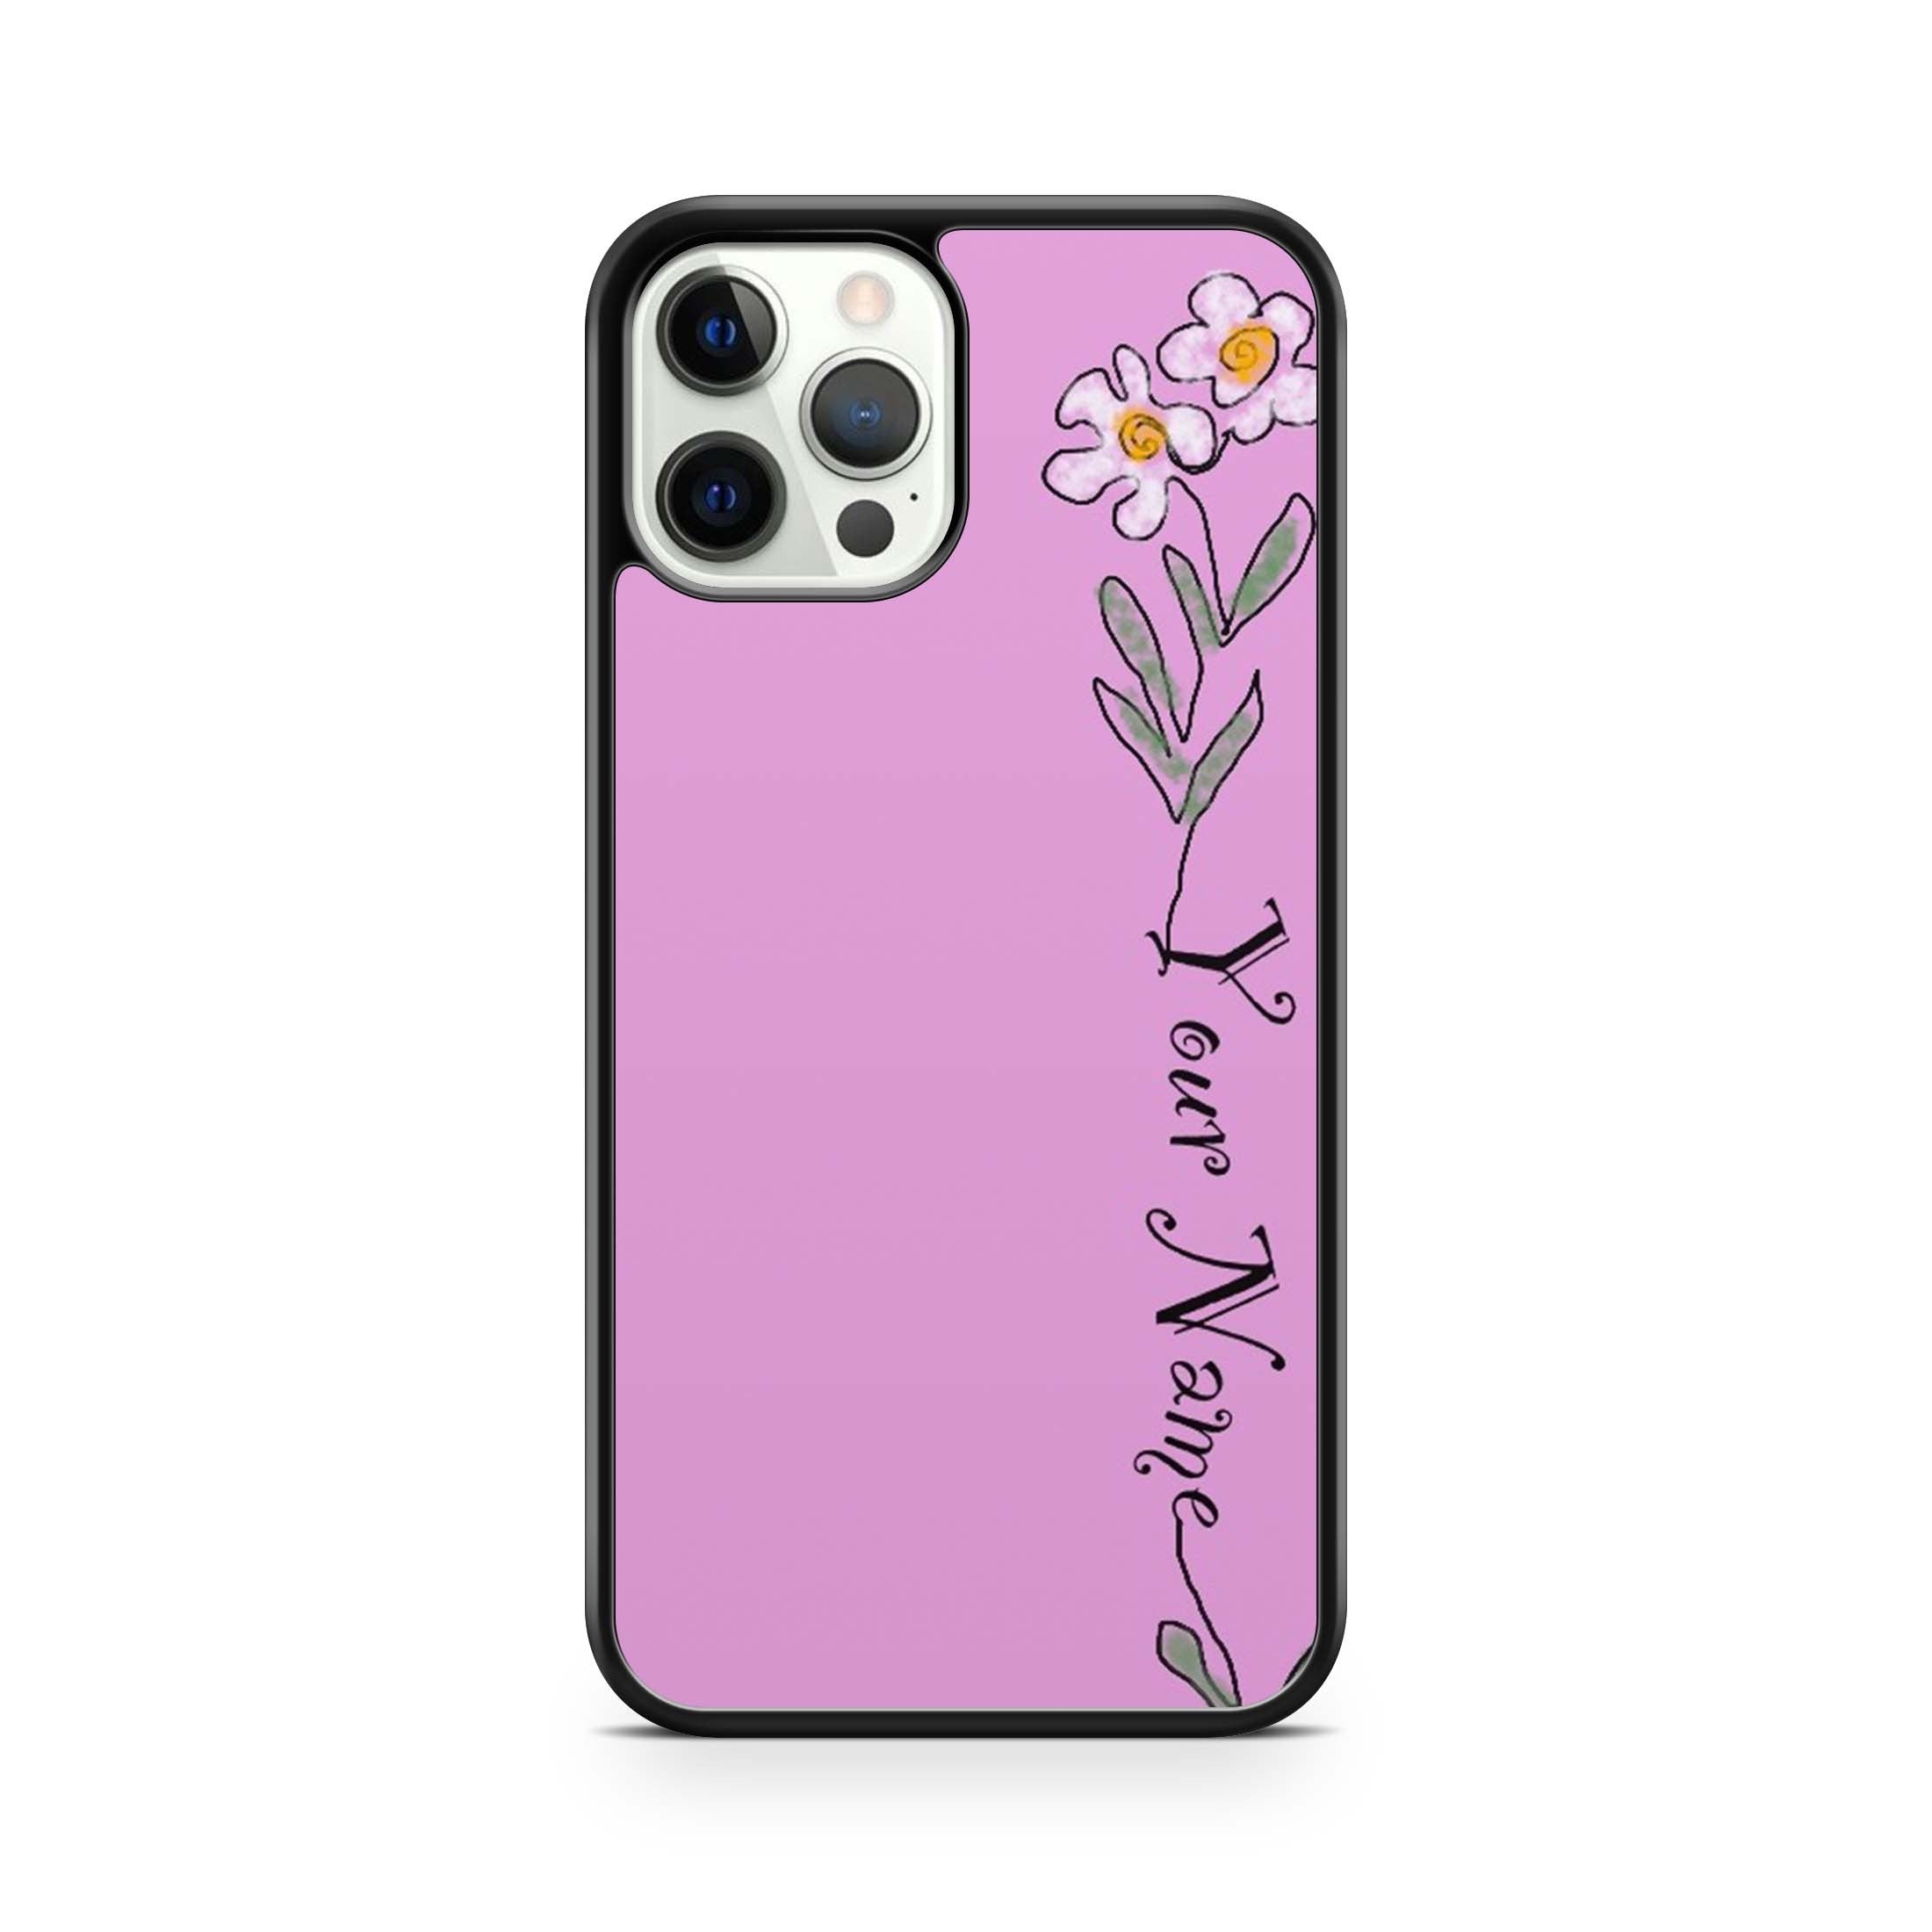 Minimalist Floral Design Personalised With Your Name Phone Case